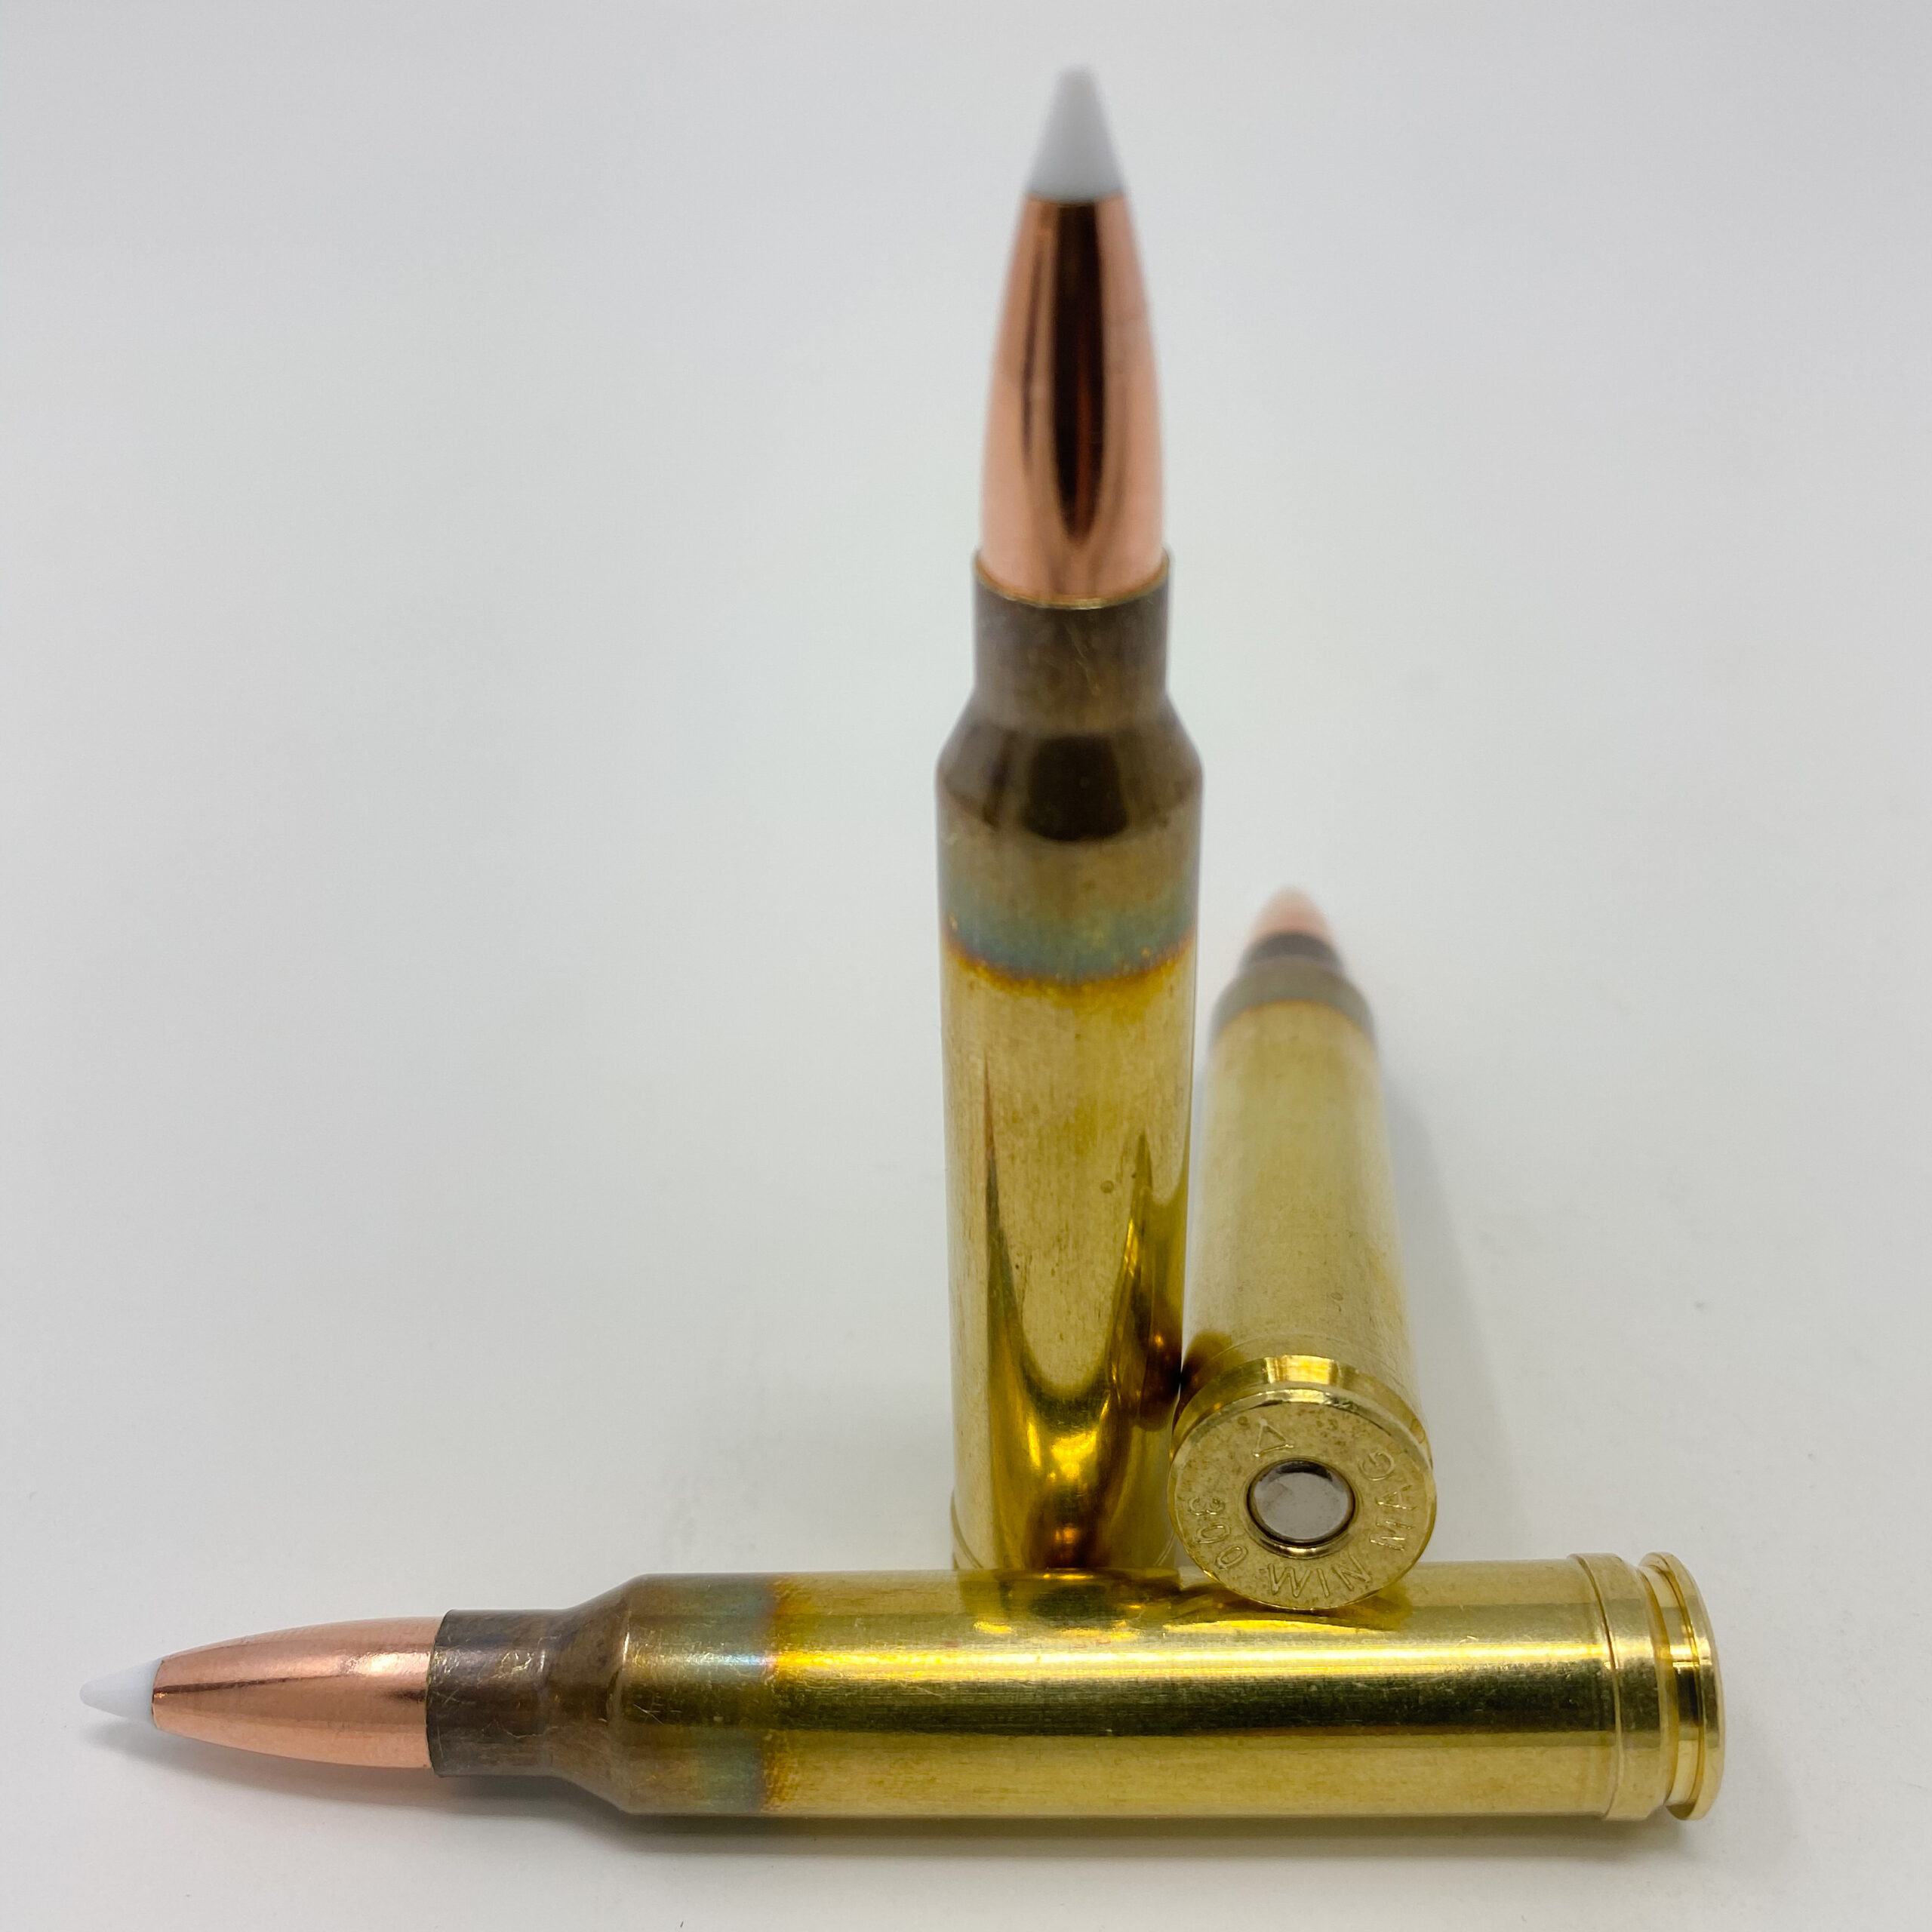 Source: www.unknownmunitions.com. 